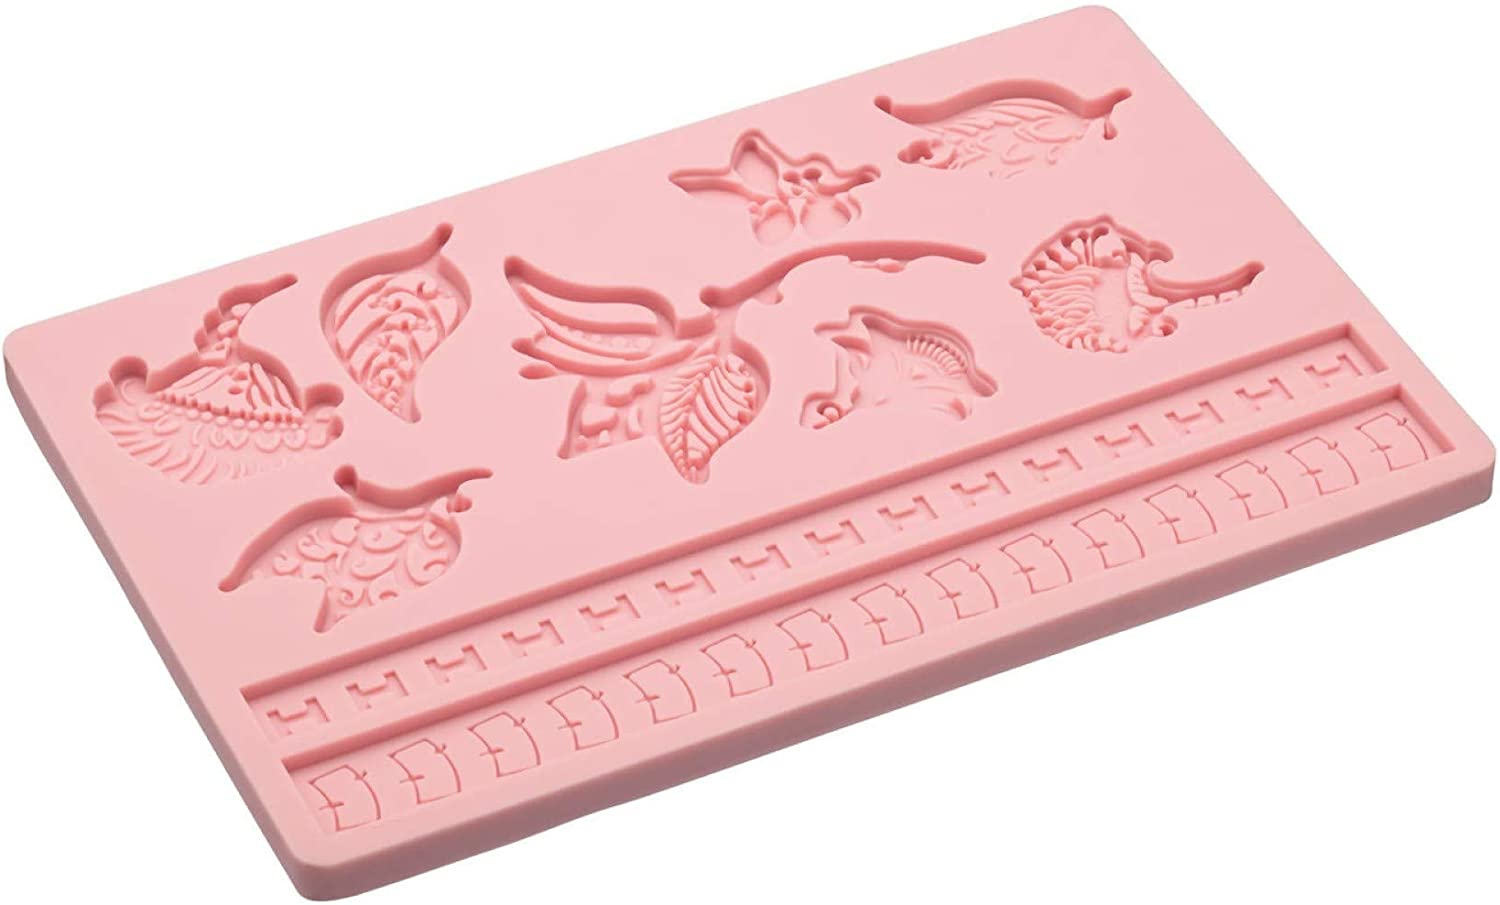 Kitchen Craft Sweetly Does It Leaves Silicone Fondant Mould